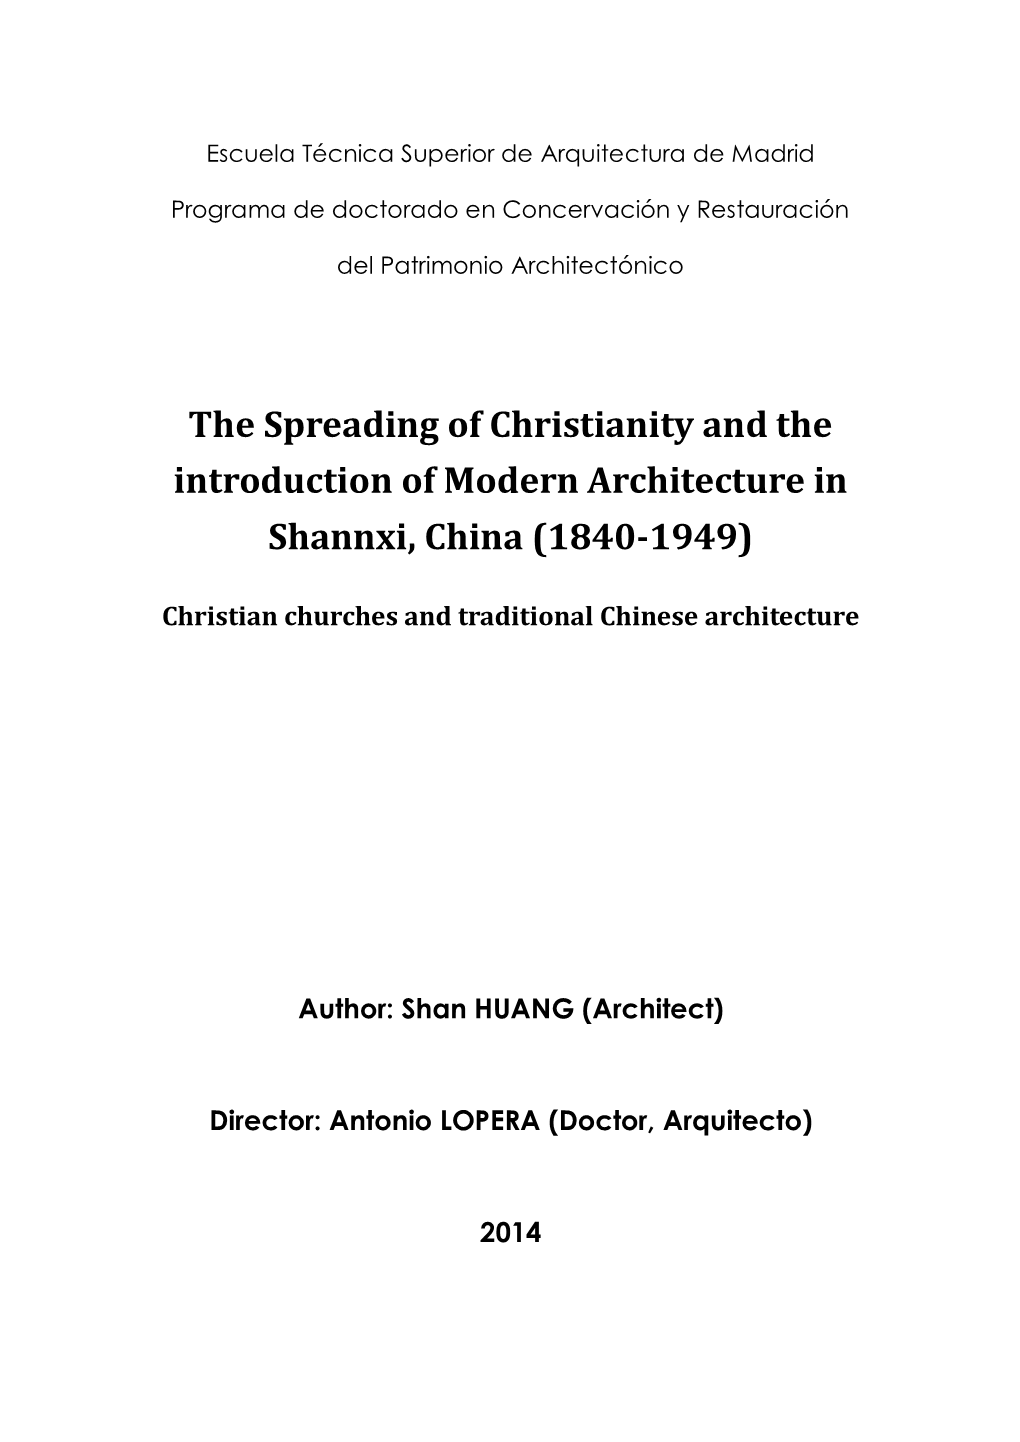 The Spreading of Christianity and the Introduction of Modern Architecture in Shannxi, China (1840-1949)